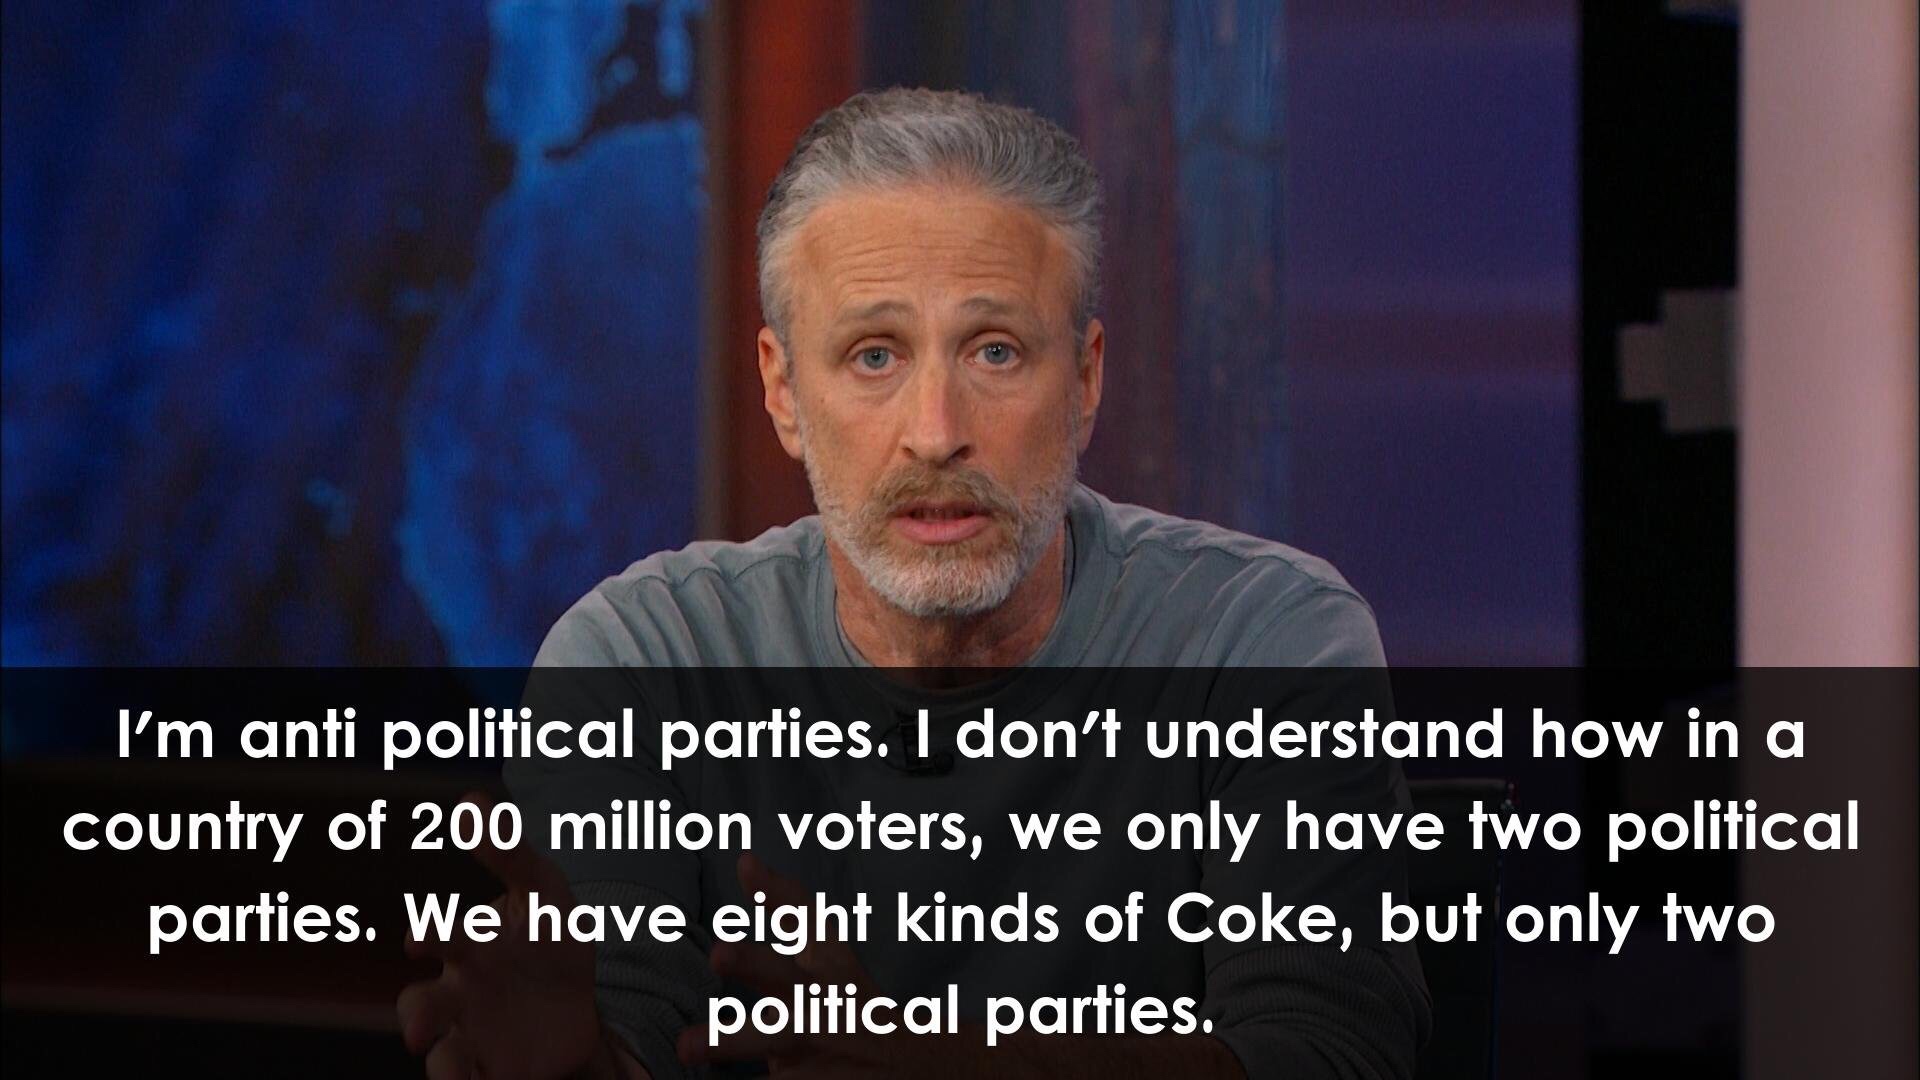 quotes about political parties - I'm anti political parties. I don't understand how in a country of 200 million voters, we only have two political parties. We have eight kinds of Coke, but only two political parties.